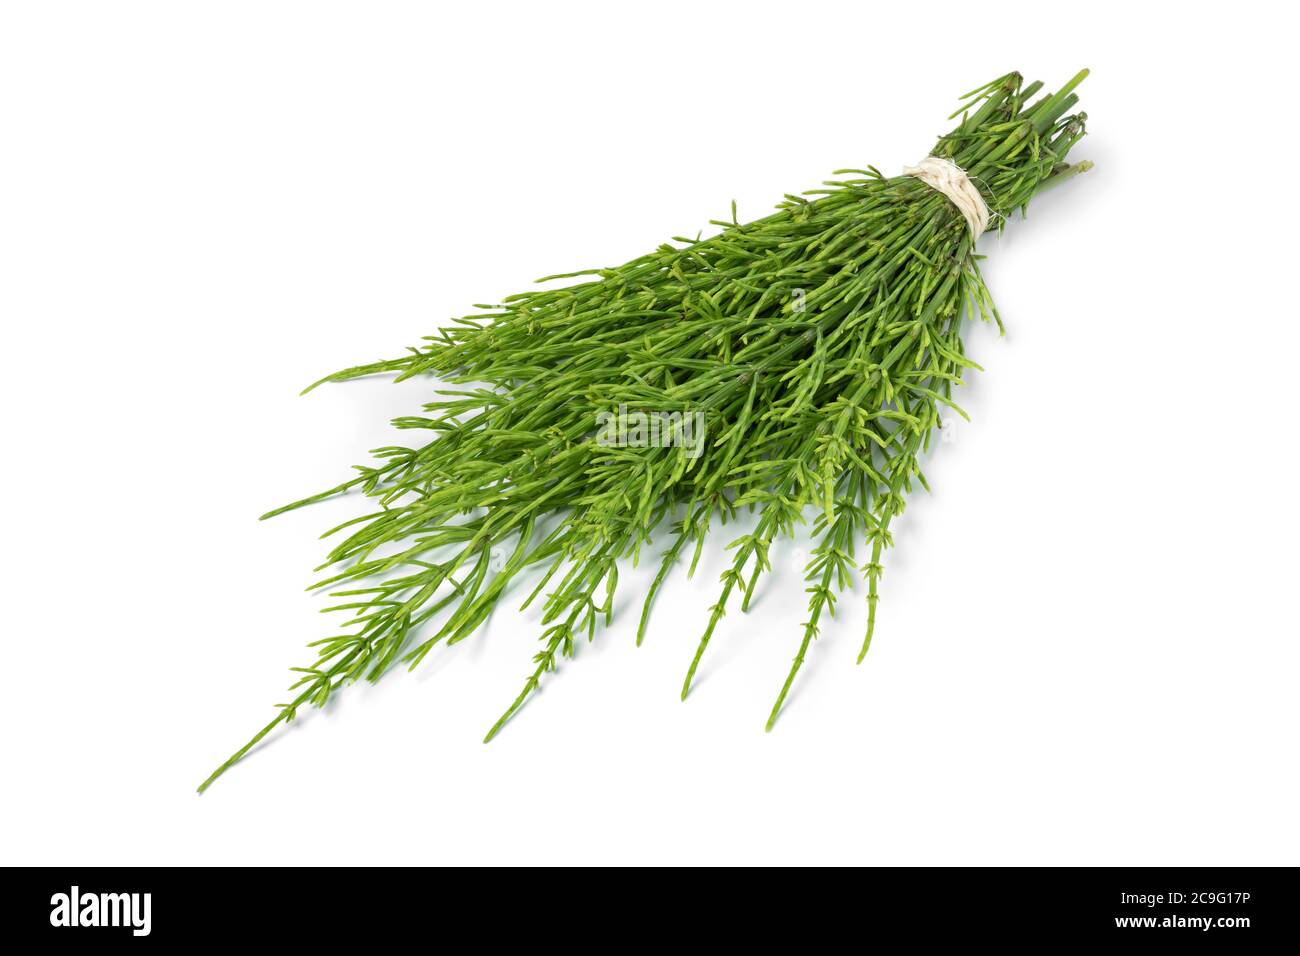 Bouquet of fresh green field horsetail twigs isolated on white background Stock Photo